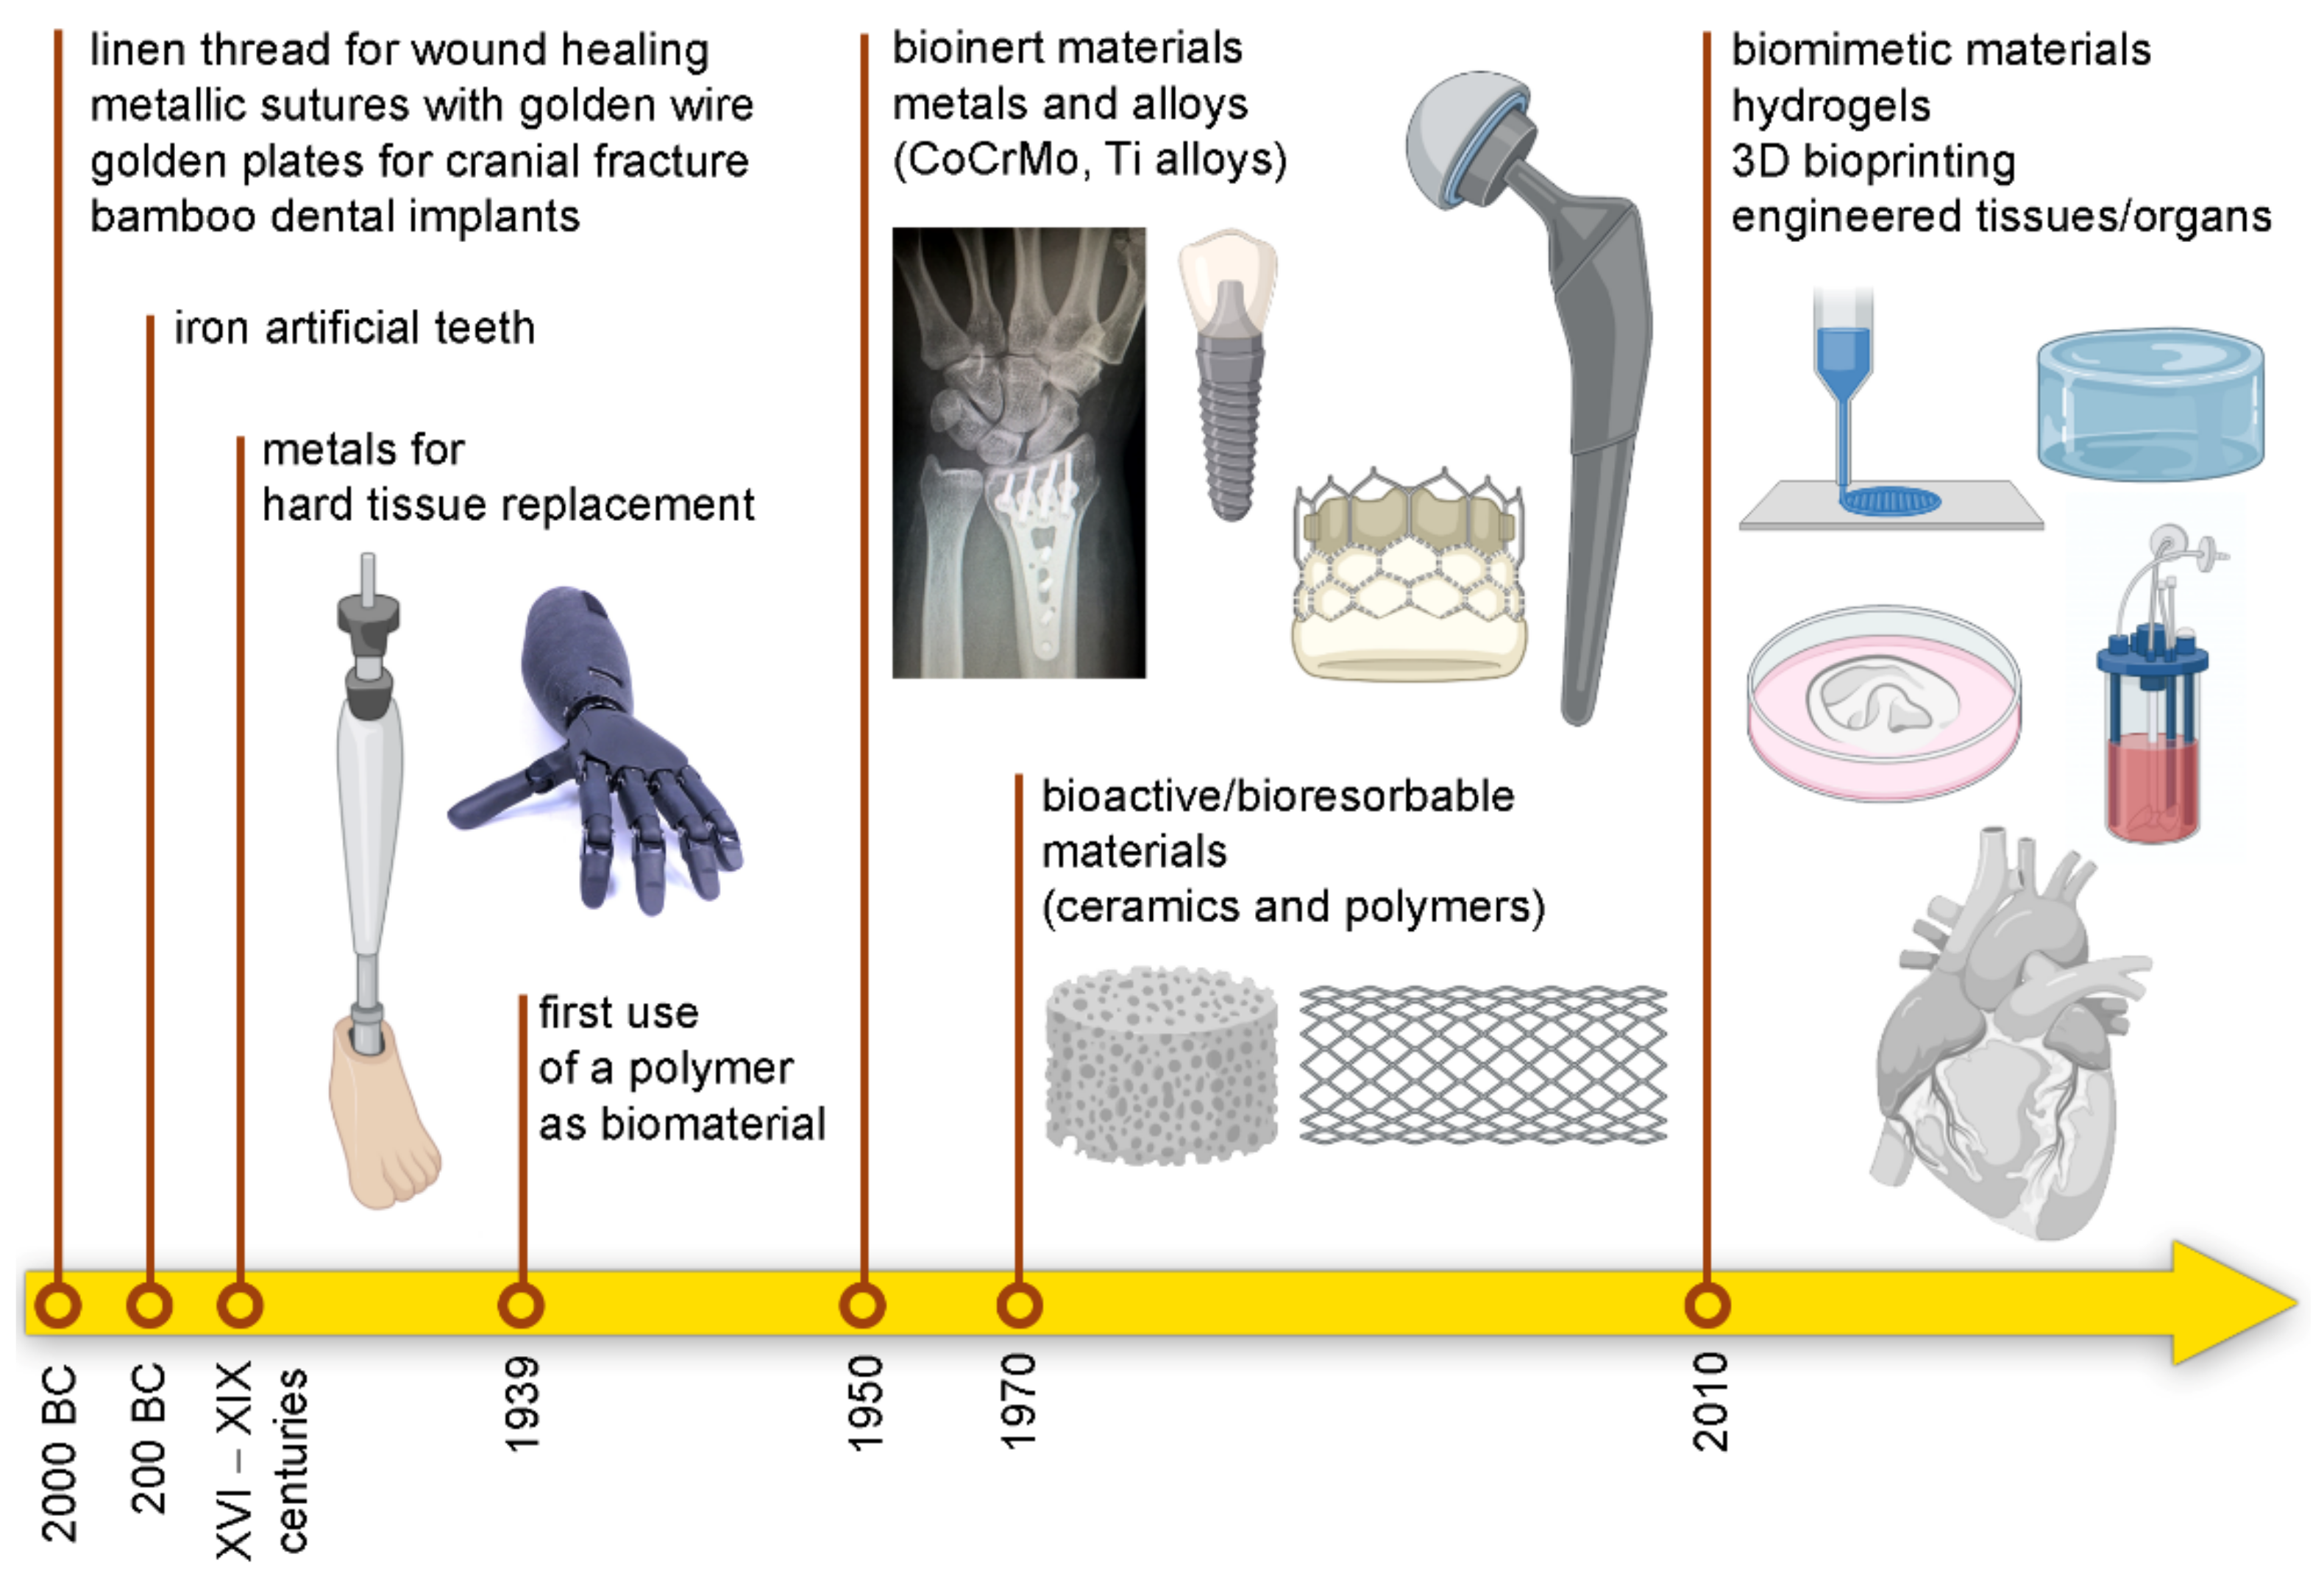 Processes | Full-Text and Their Biomedical Applications: From to Regeneration